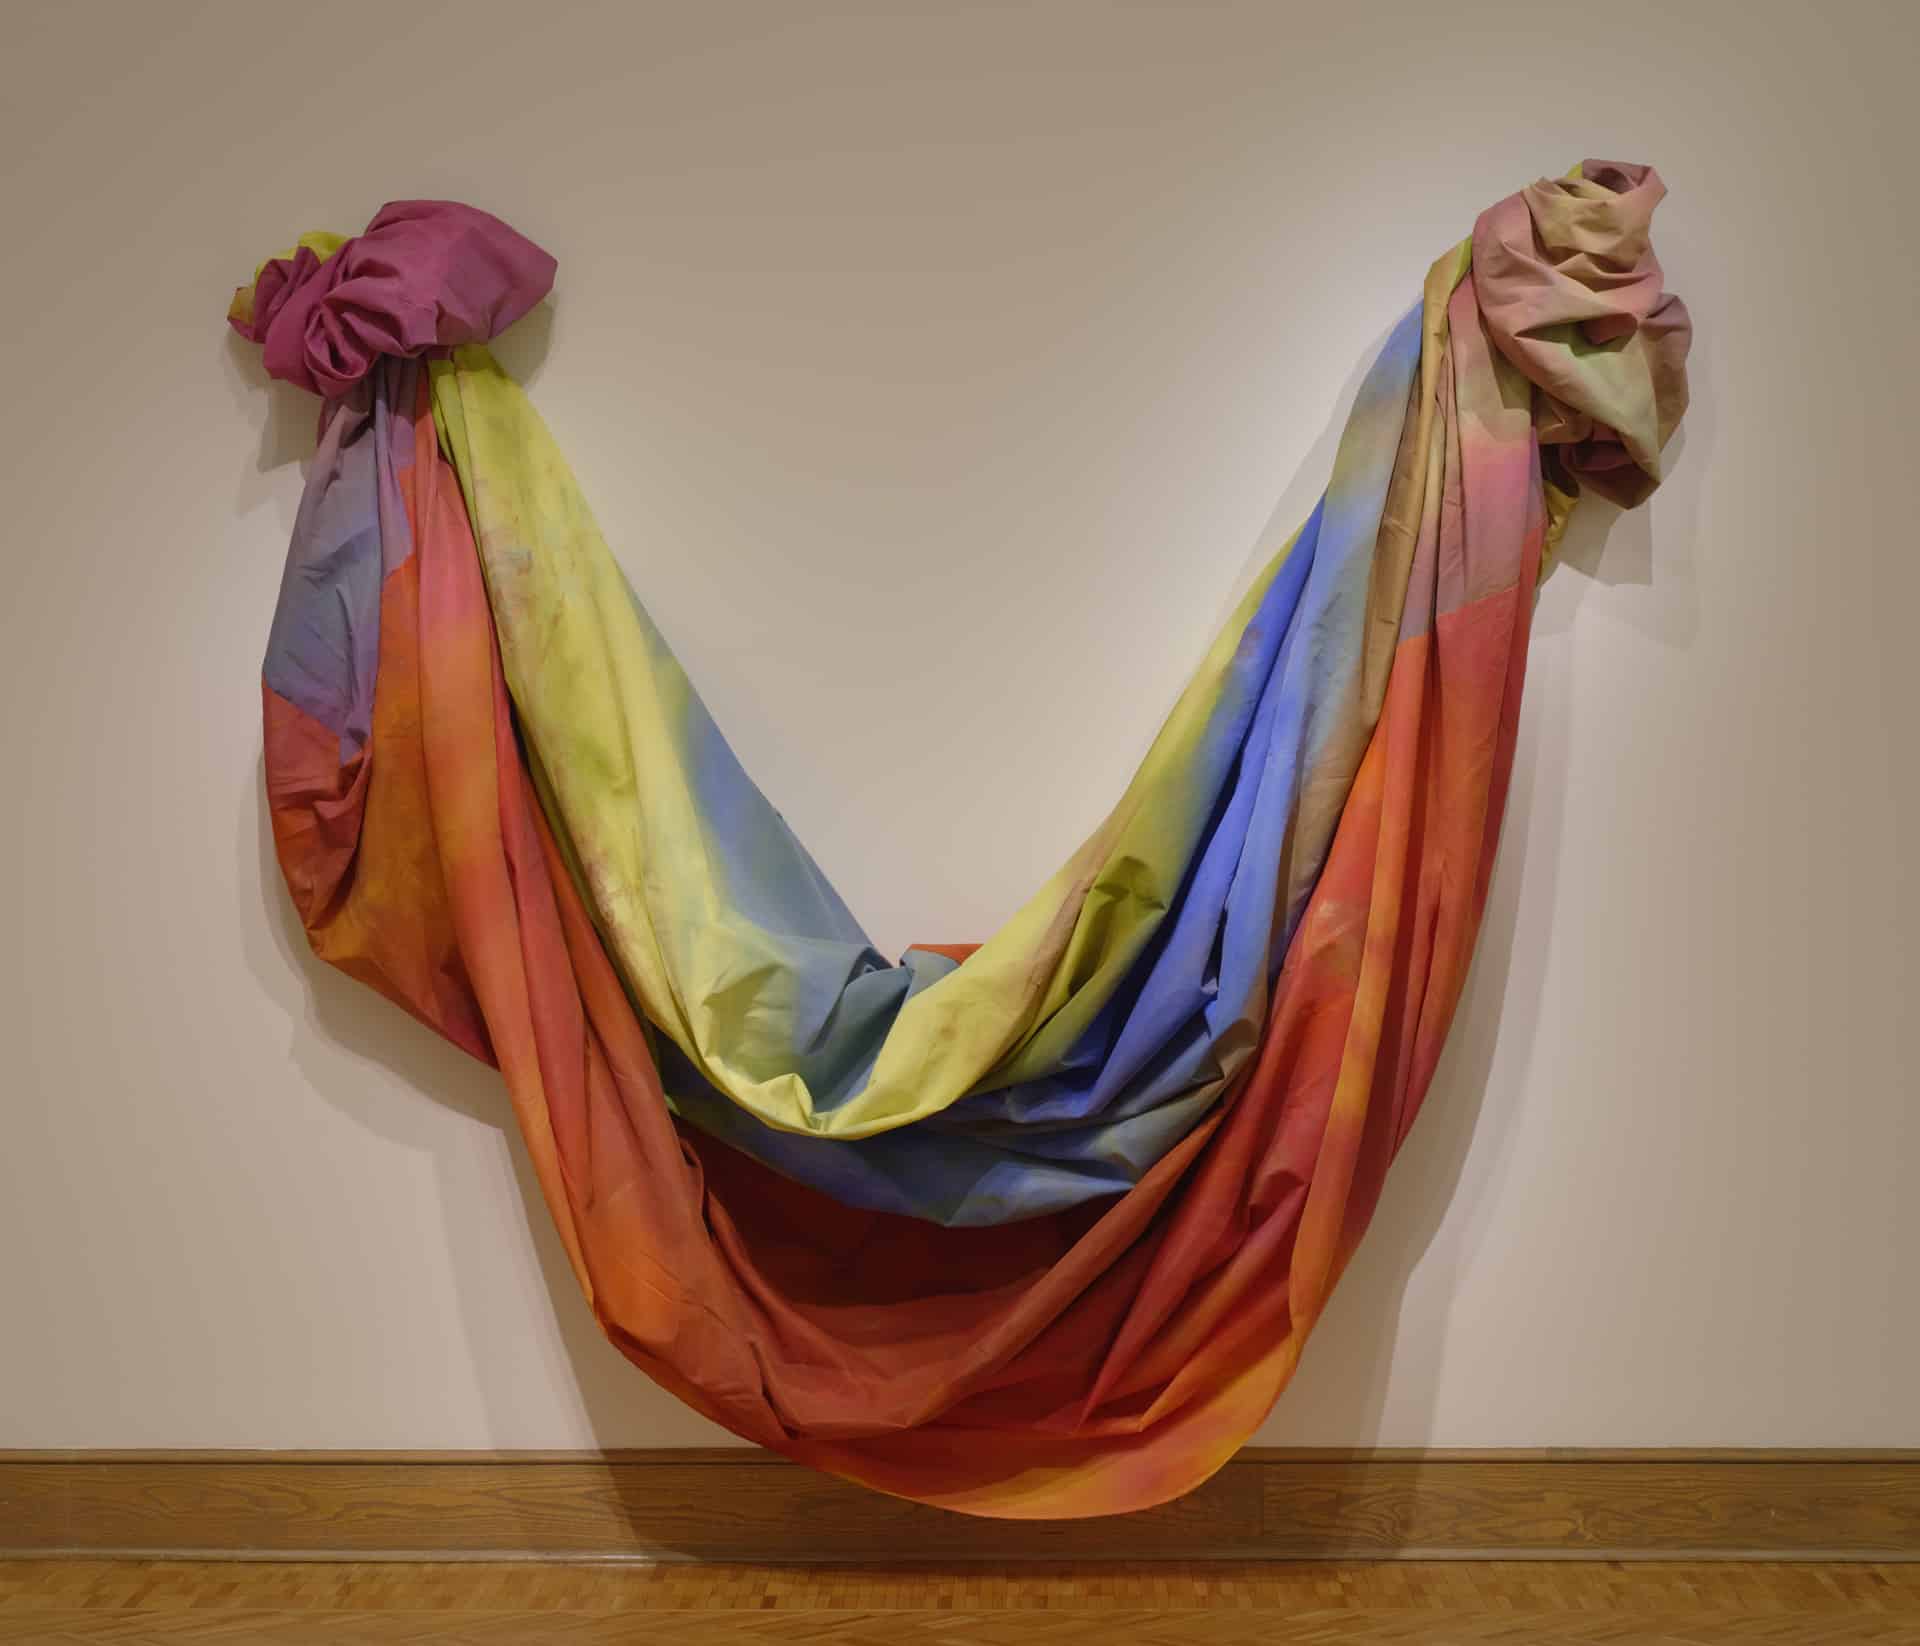 a large, colorful swag of fabric hung from the wall in a u-shape